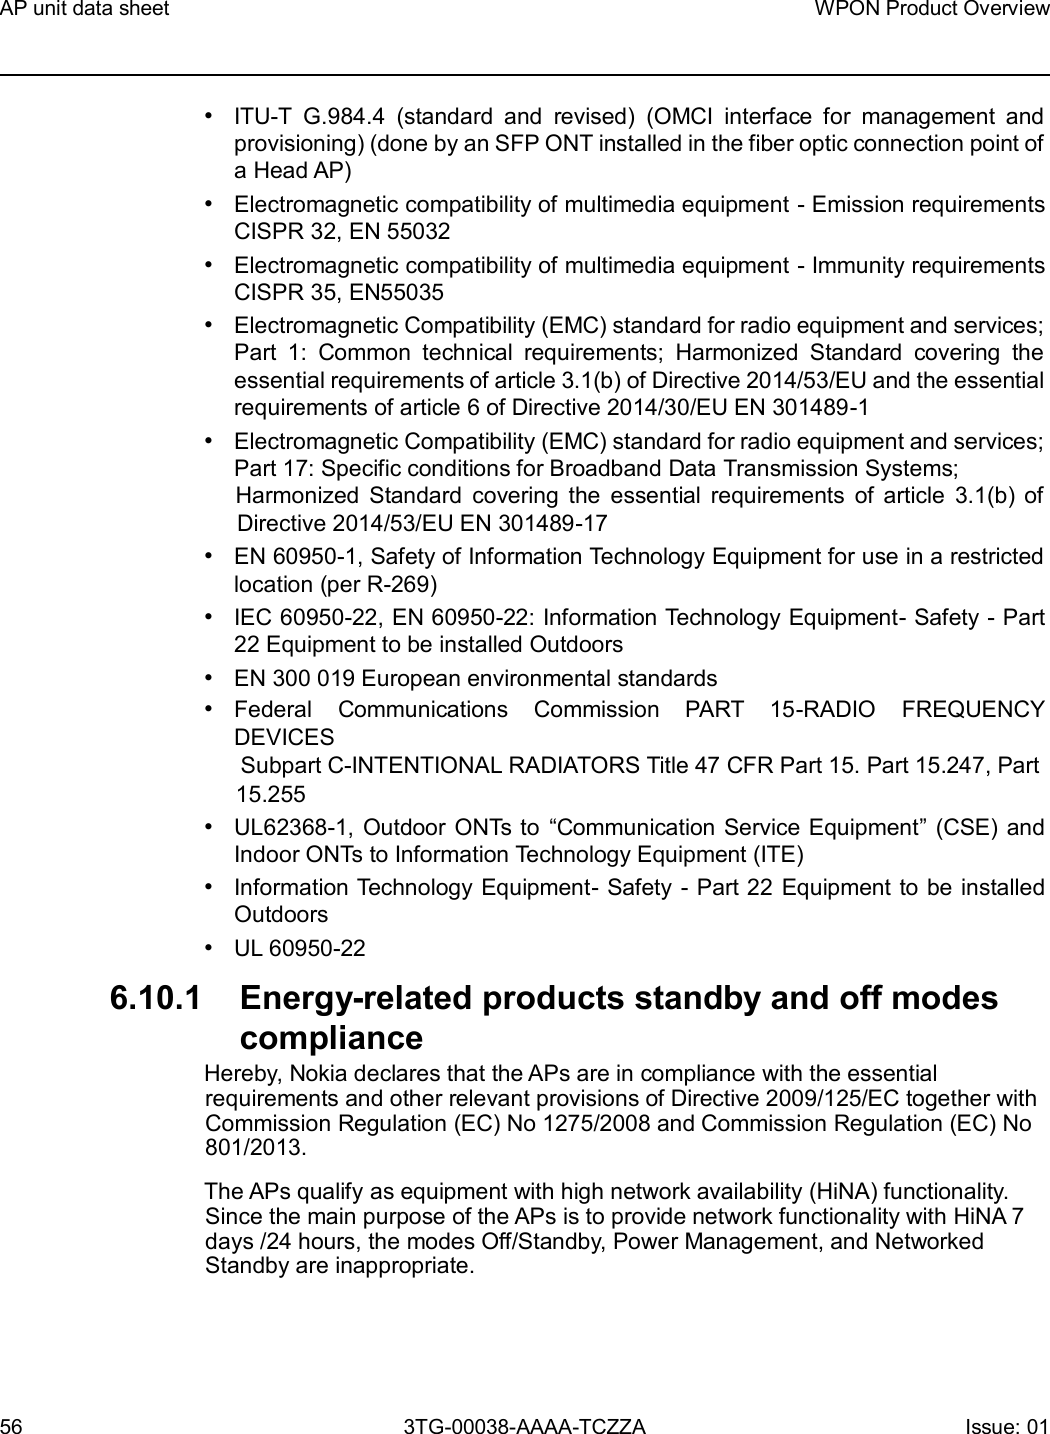 Page 56 of Nokia Bell 7577WPONAPED WPON User Manual WPON Product Overview